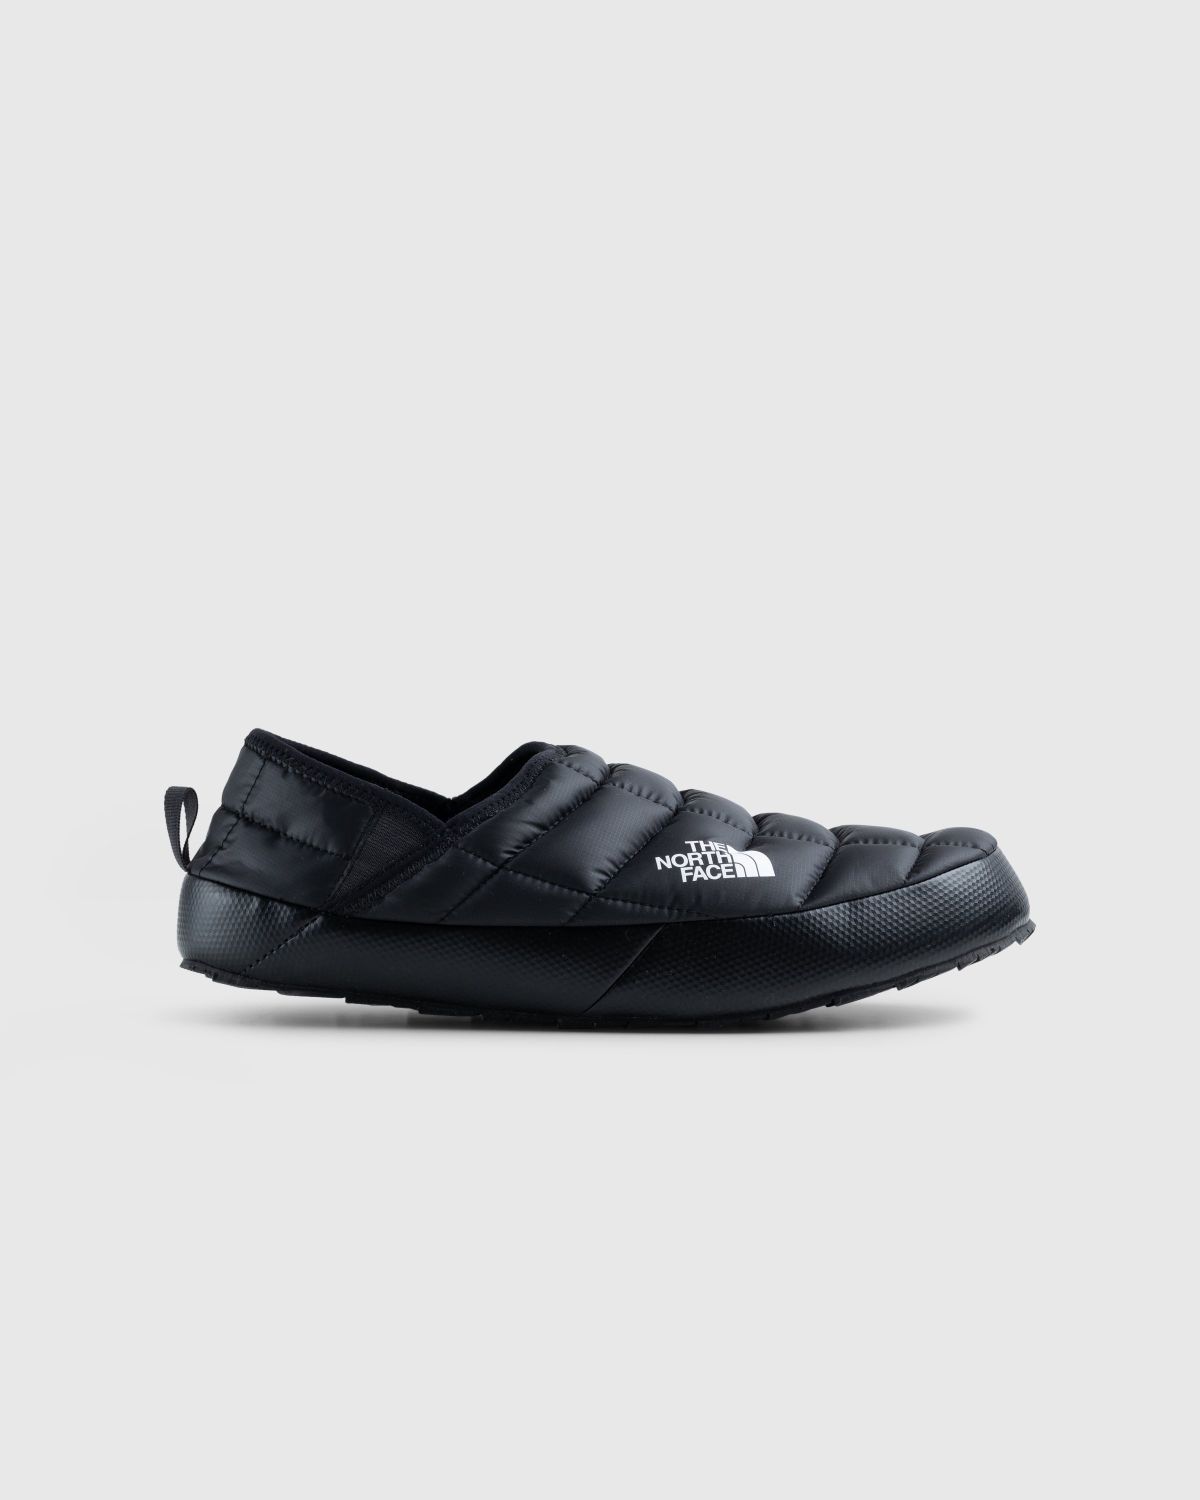 The North Face – ThermoBall Traction Mules V TNF Black/White - Sandals & Slides - Black - Image 1